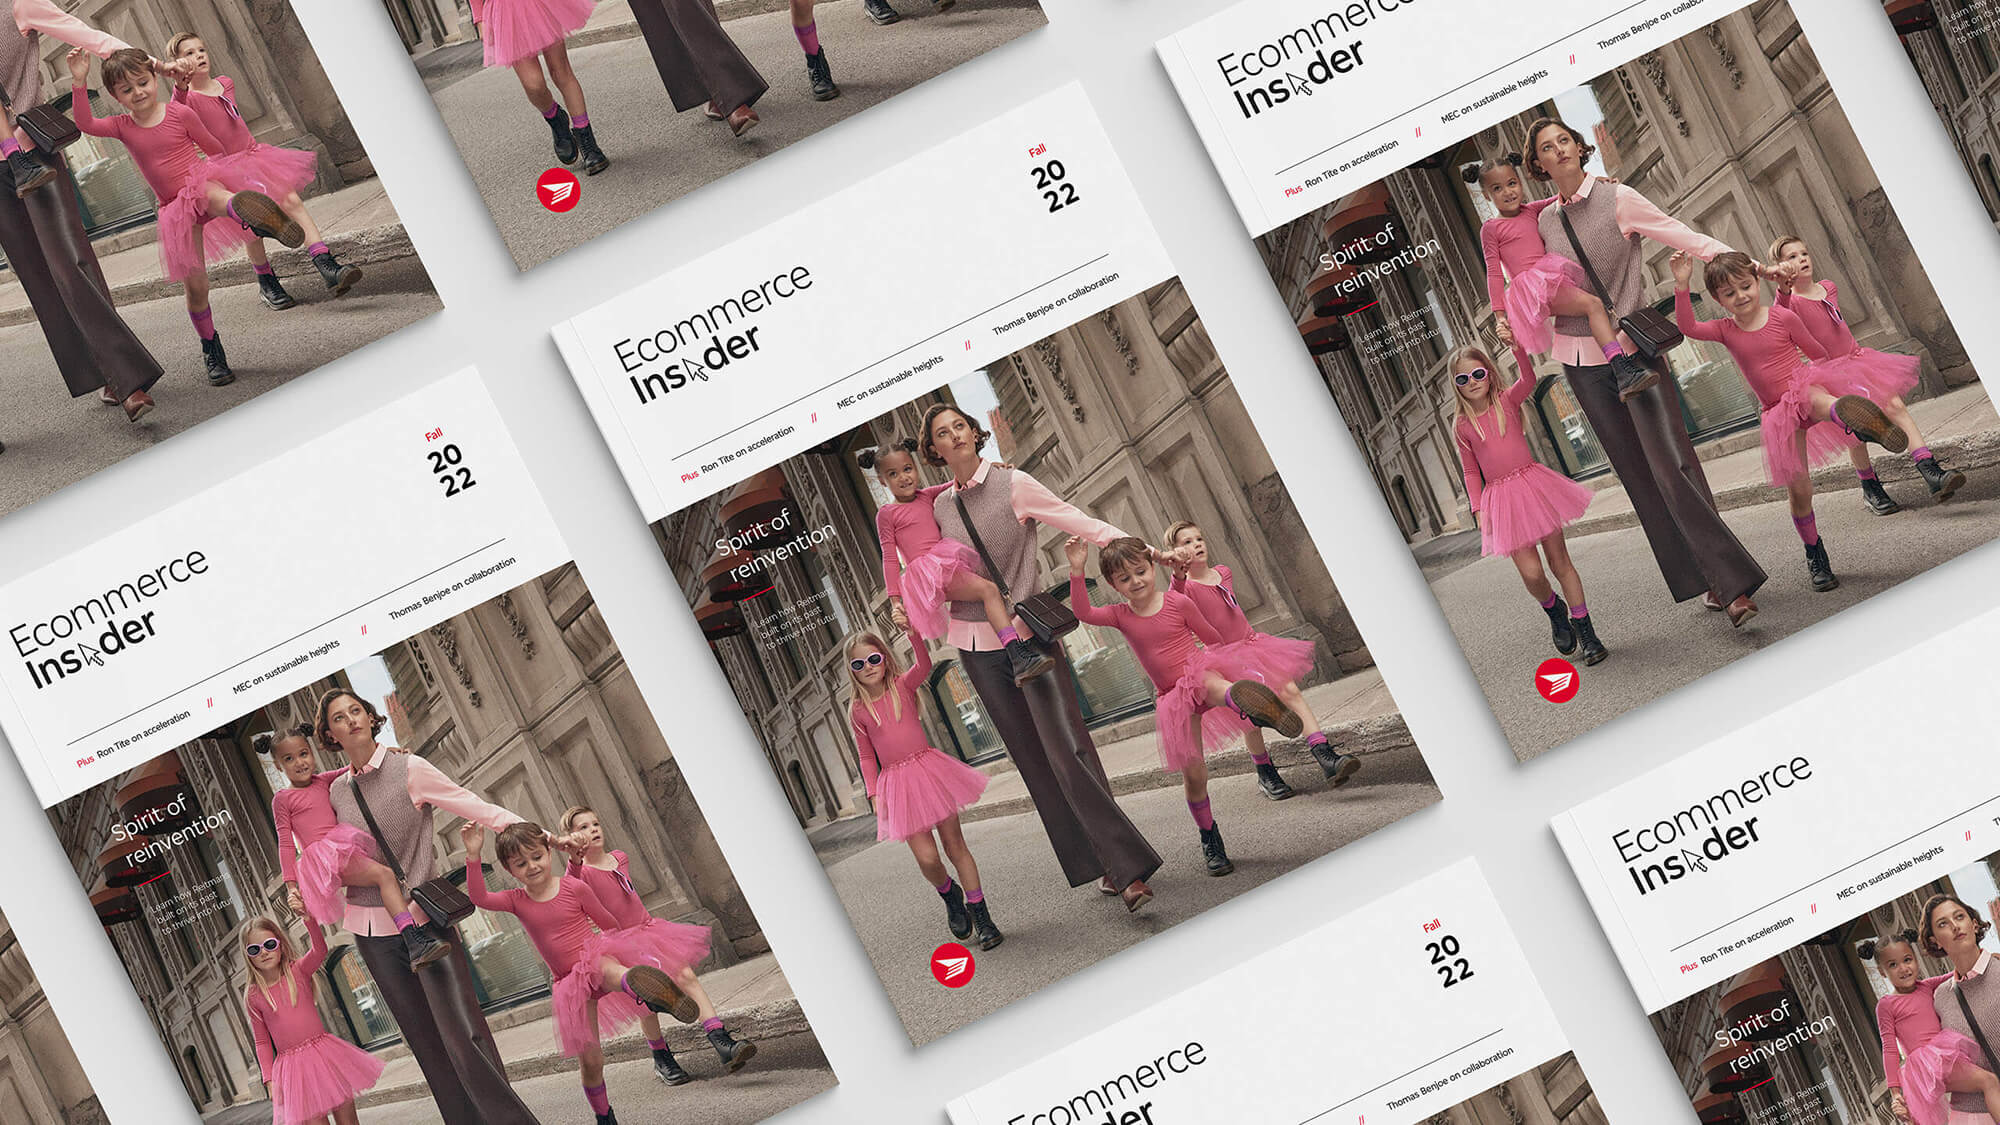 Canada Post eCommerce Insider Magazine by The Coopers